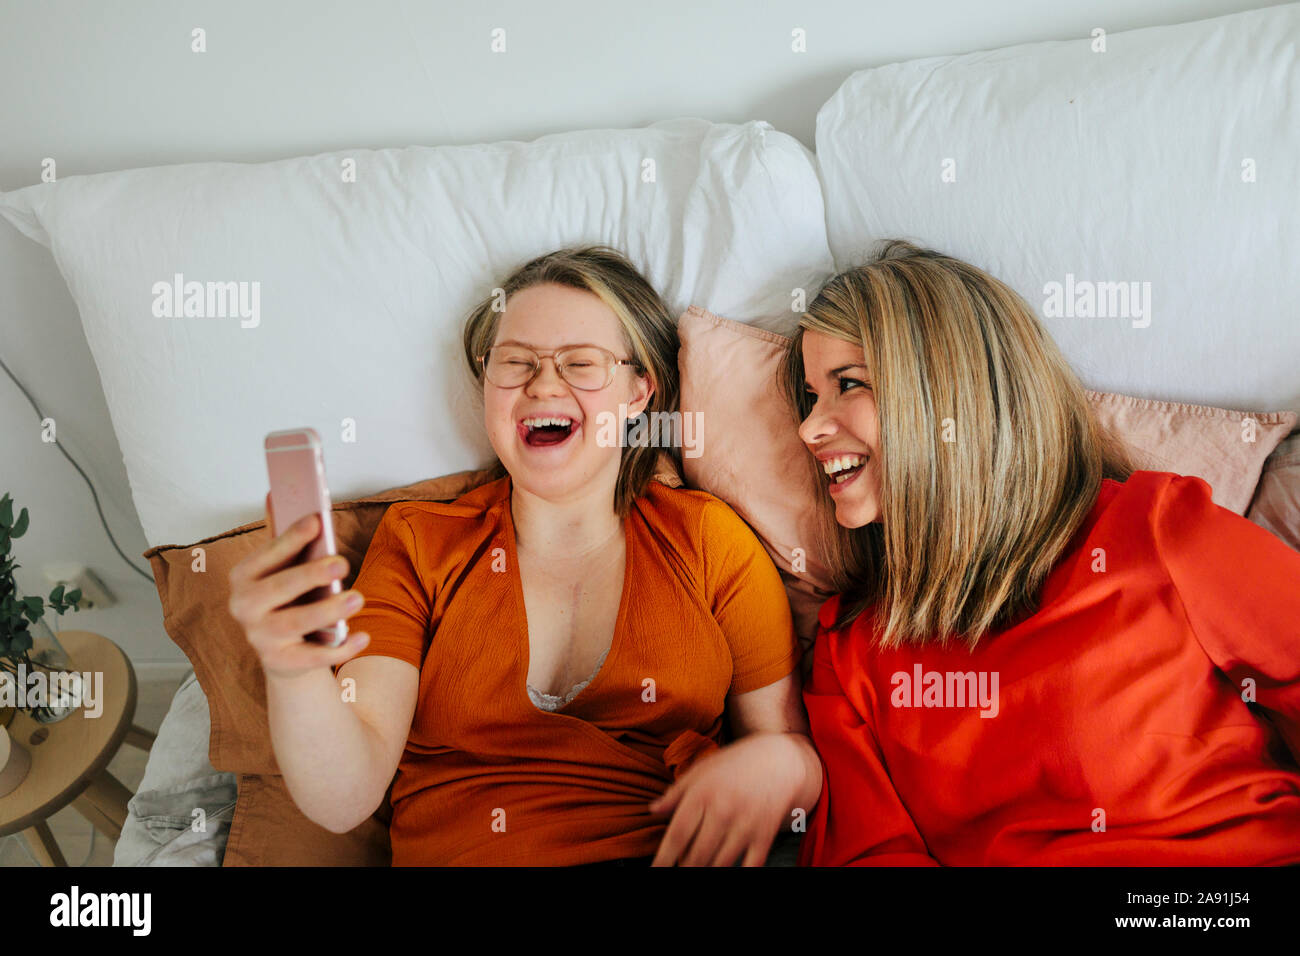 Sisters on bed taking selfie Stock Photo